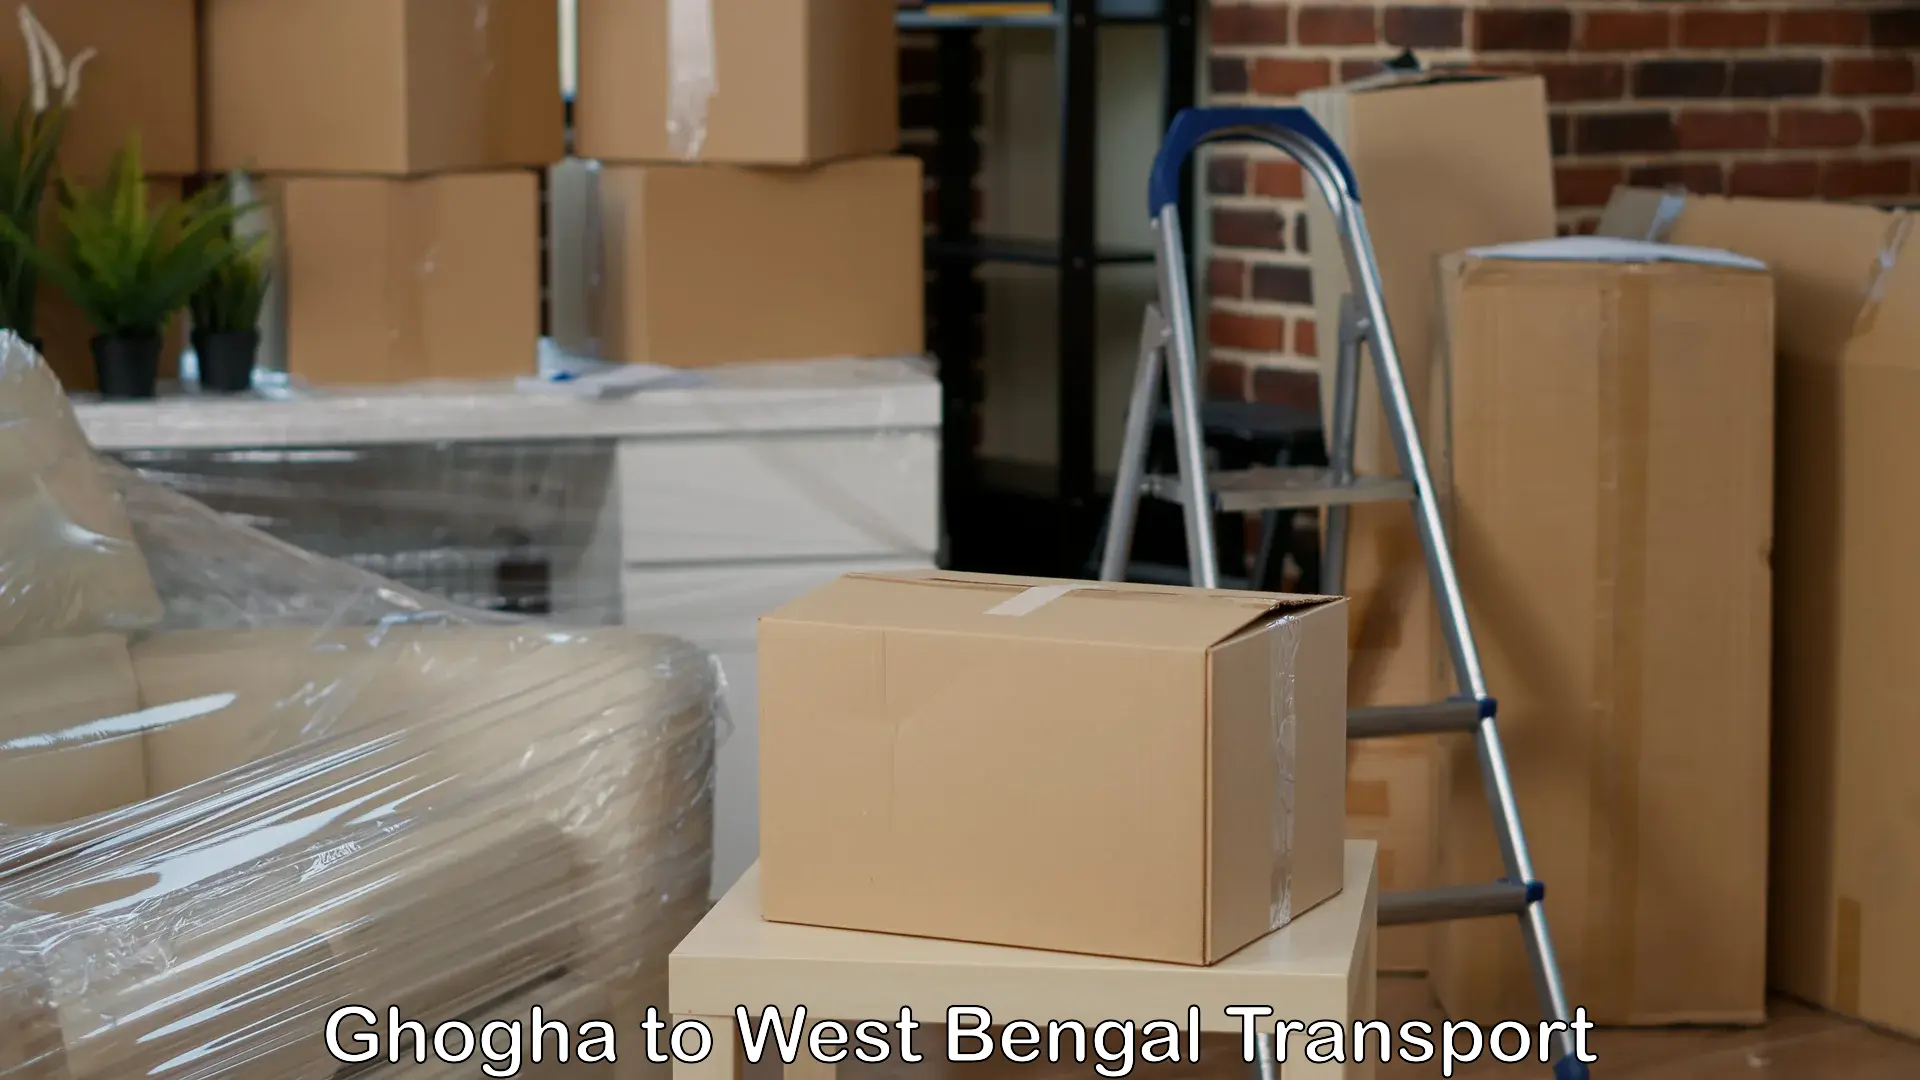 Cargo transportation services in Ghogha to Hooghly